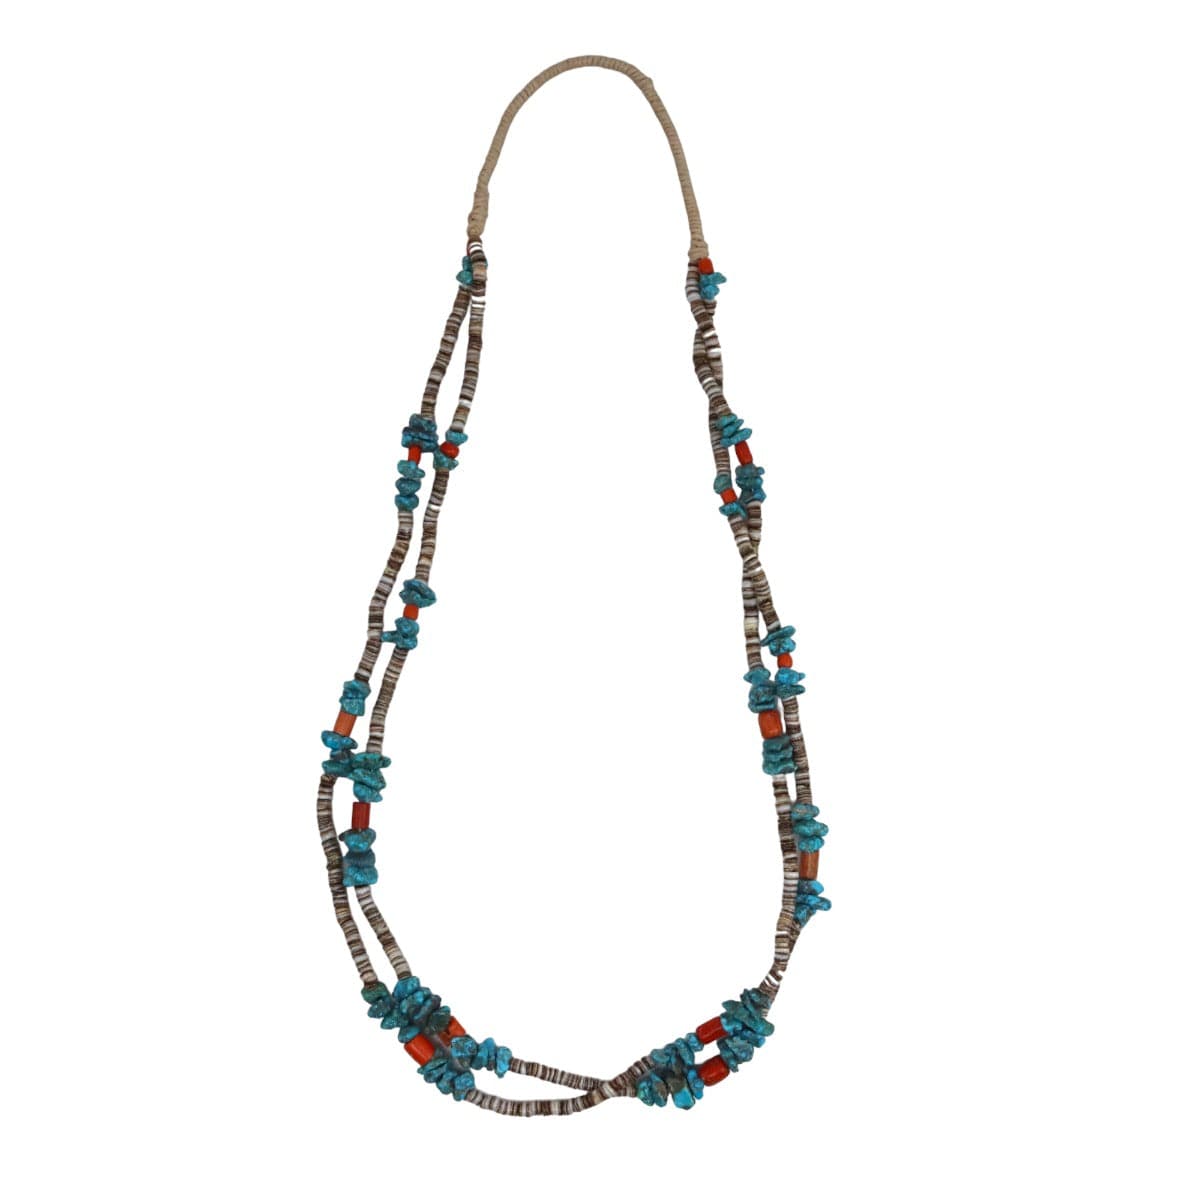 Navajo 2-Strand Turquoise Nugget, Coral, and Pinshell Heishi Necklace c. 1960s, 30" length (J15076-CO-021)